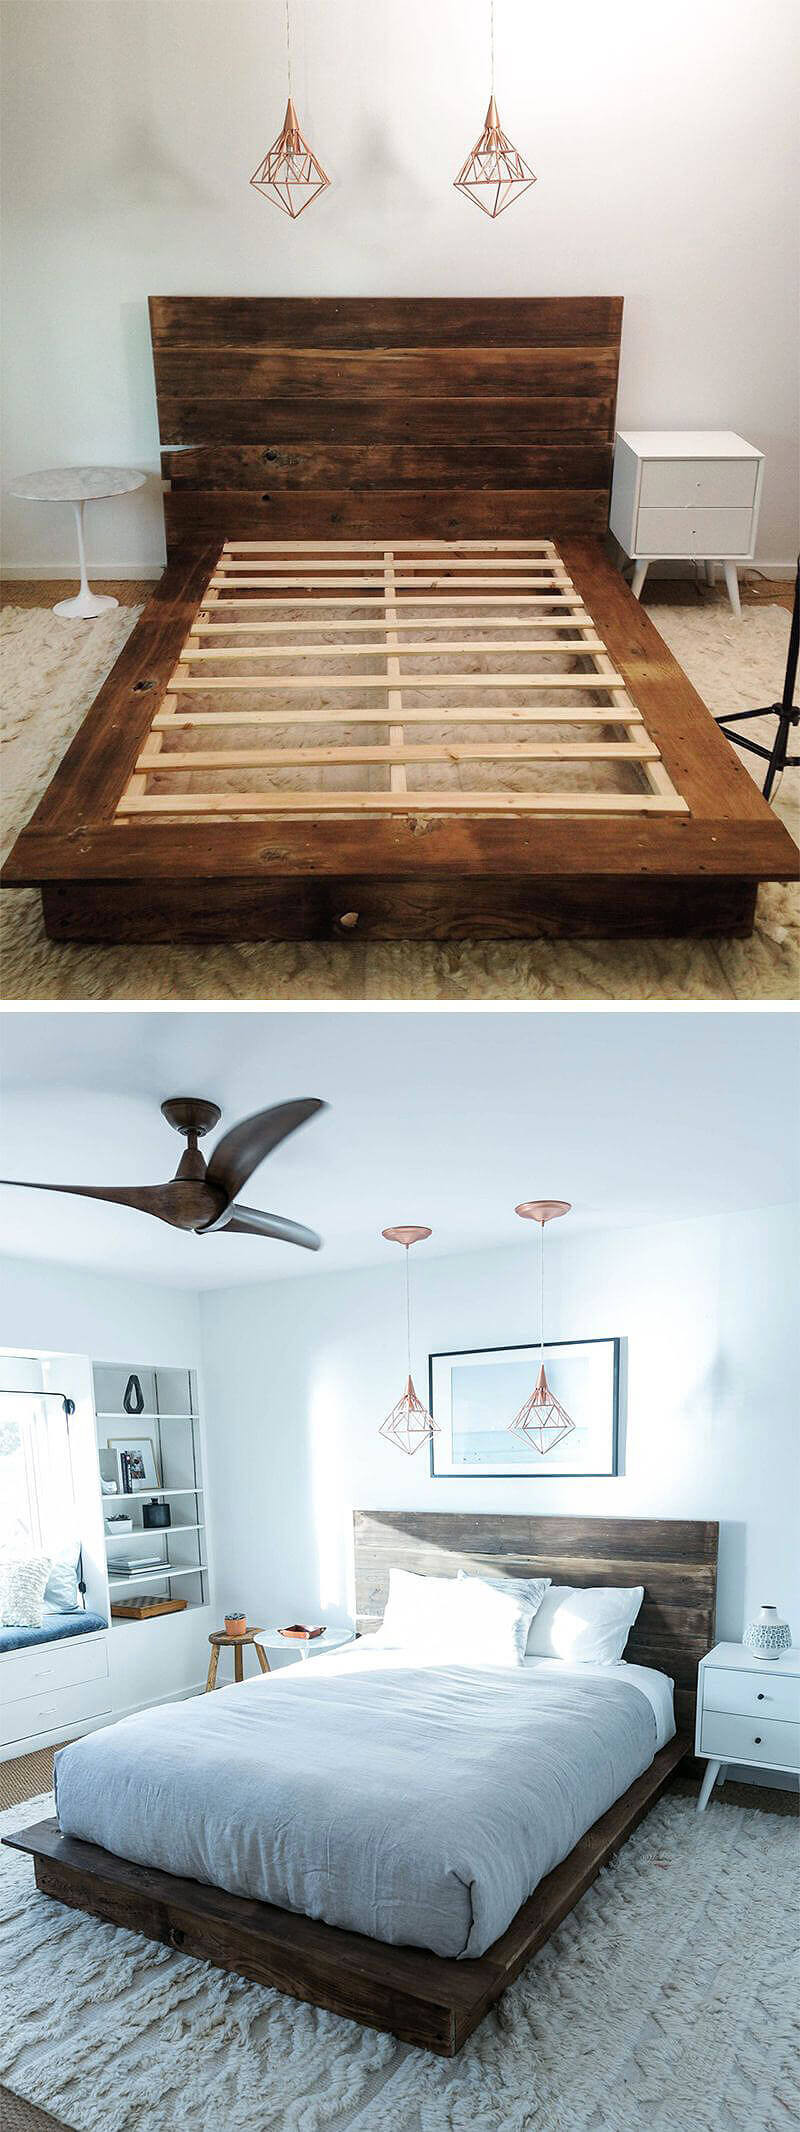 DIY Wooden Bed
 33 Best DIY Cozy Bedroom Project Ideas and Designs for 2019